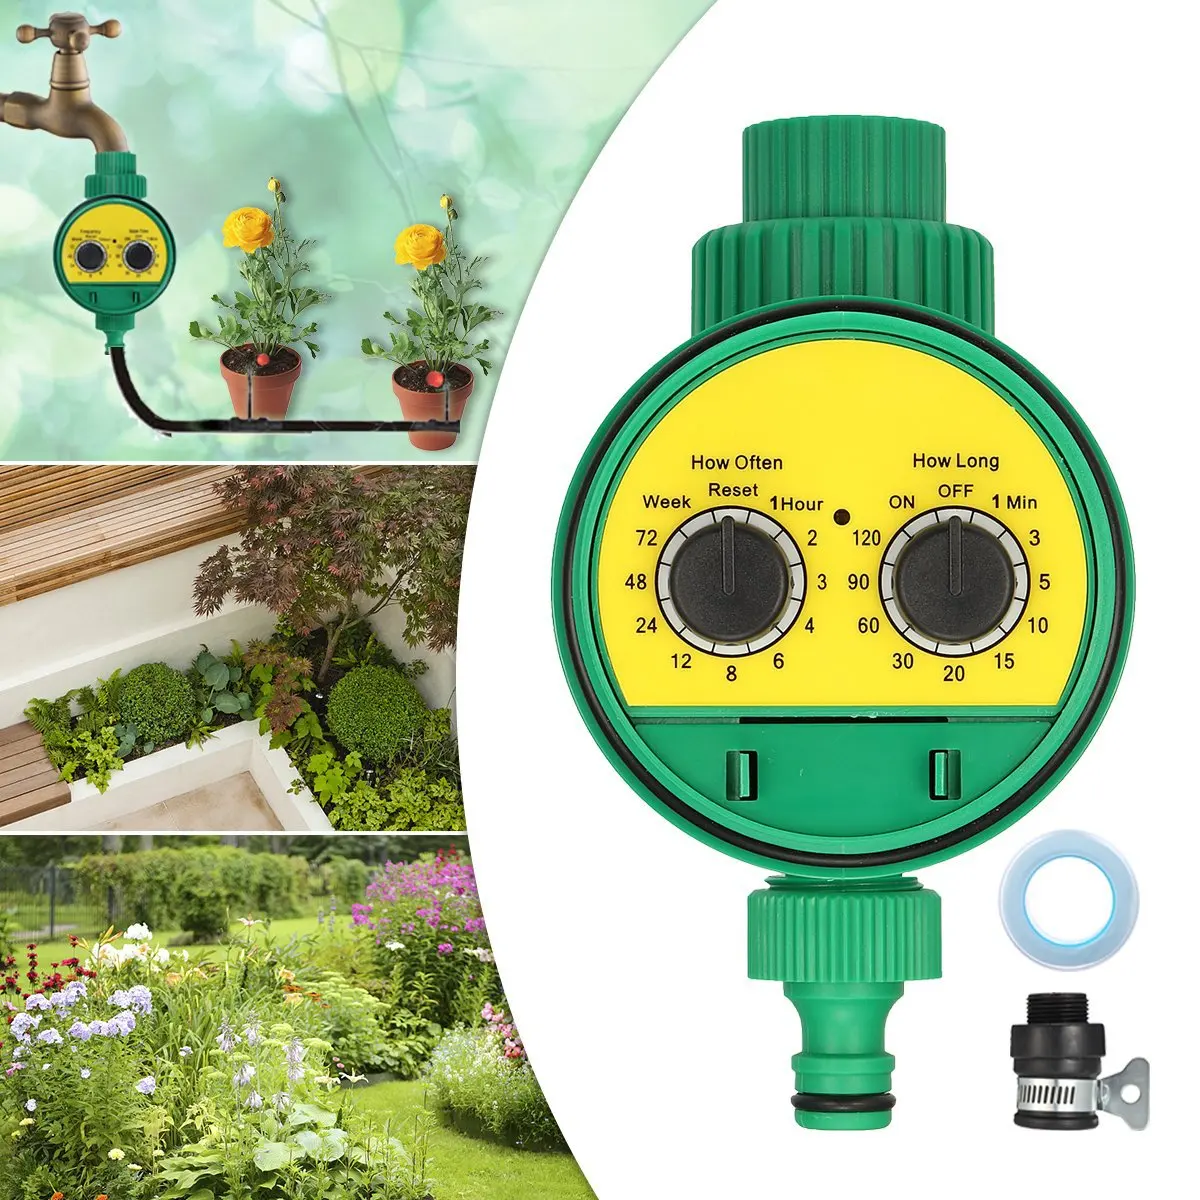 

Garden Water Timer Programmable Sprinkler Filter Timer Outdoor Yard Lawn Greenhouse Drip Irrigation Watering Plant System